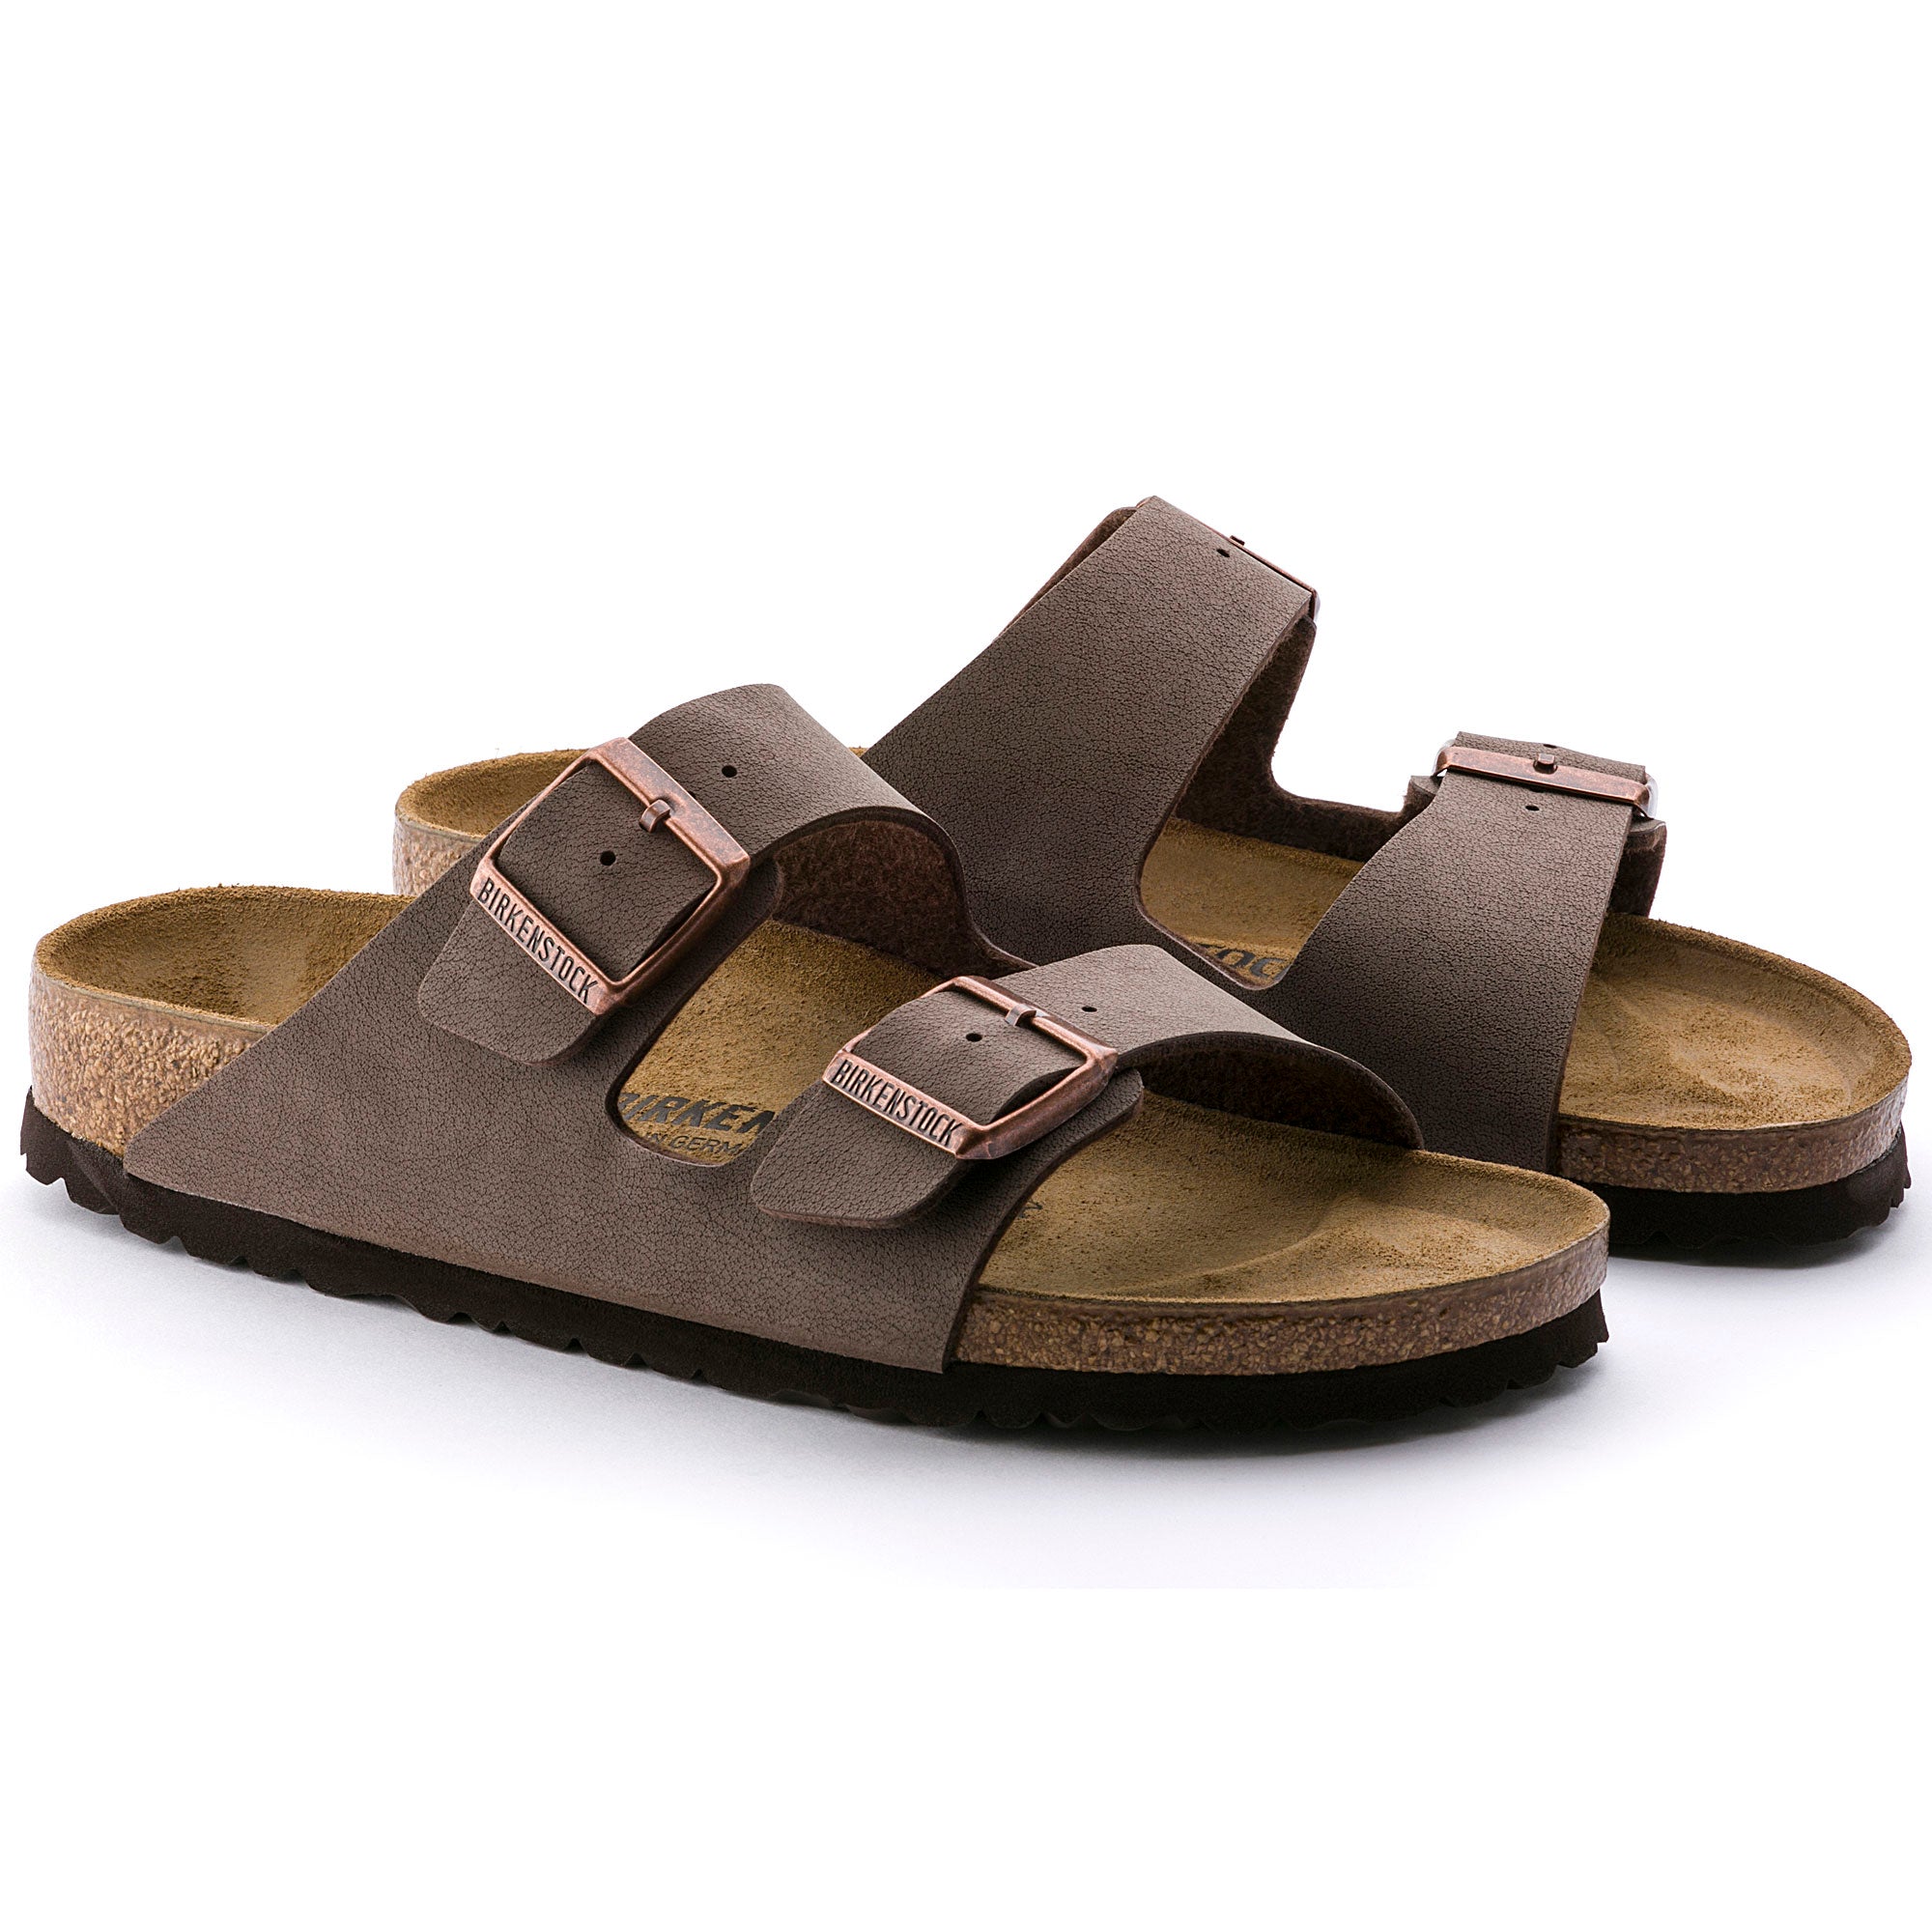 Arizona BirkiBuc in Mocca (Classic Footbed - Suede Lined) - Milu James St